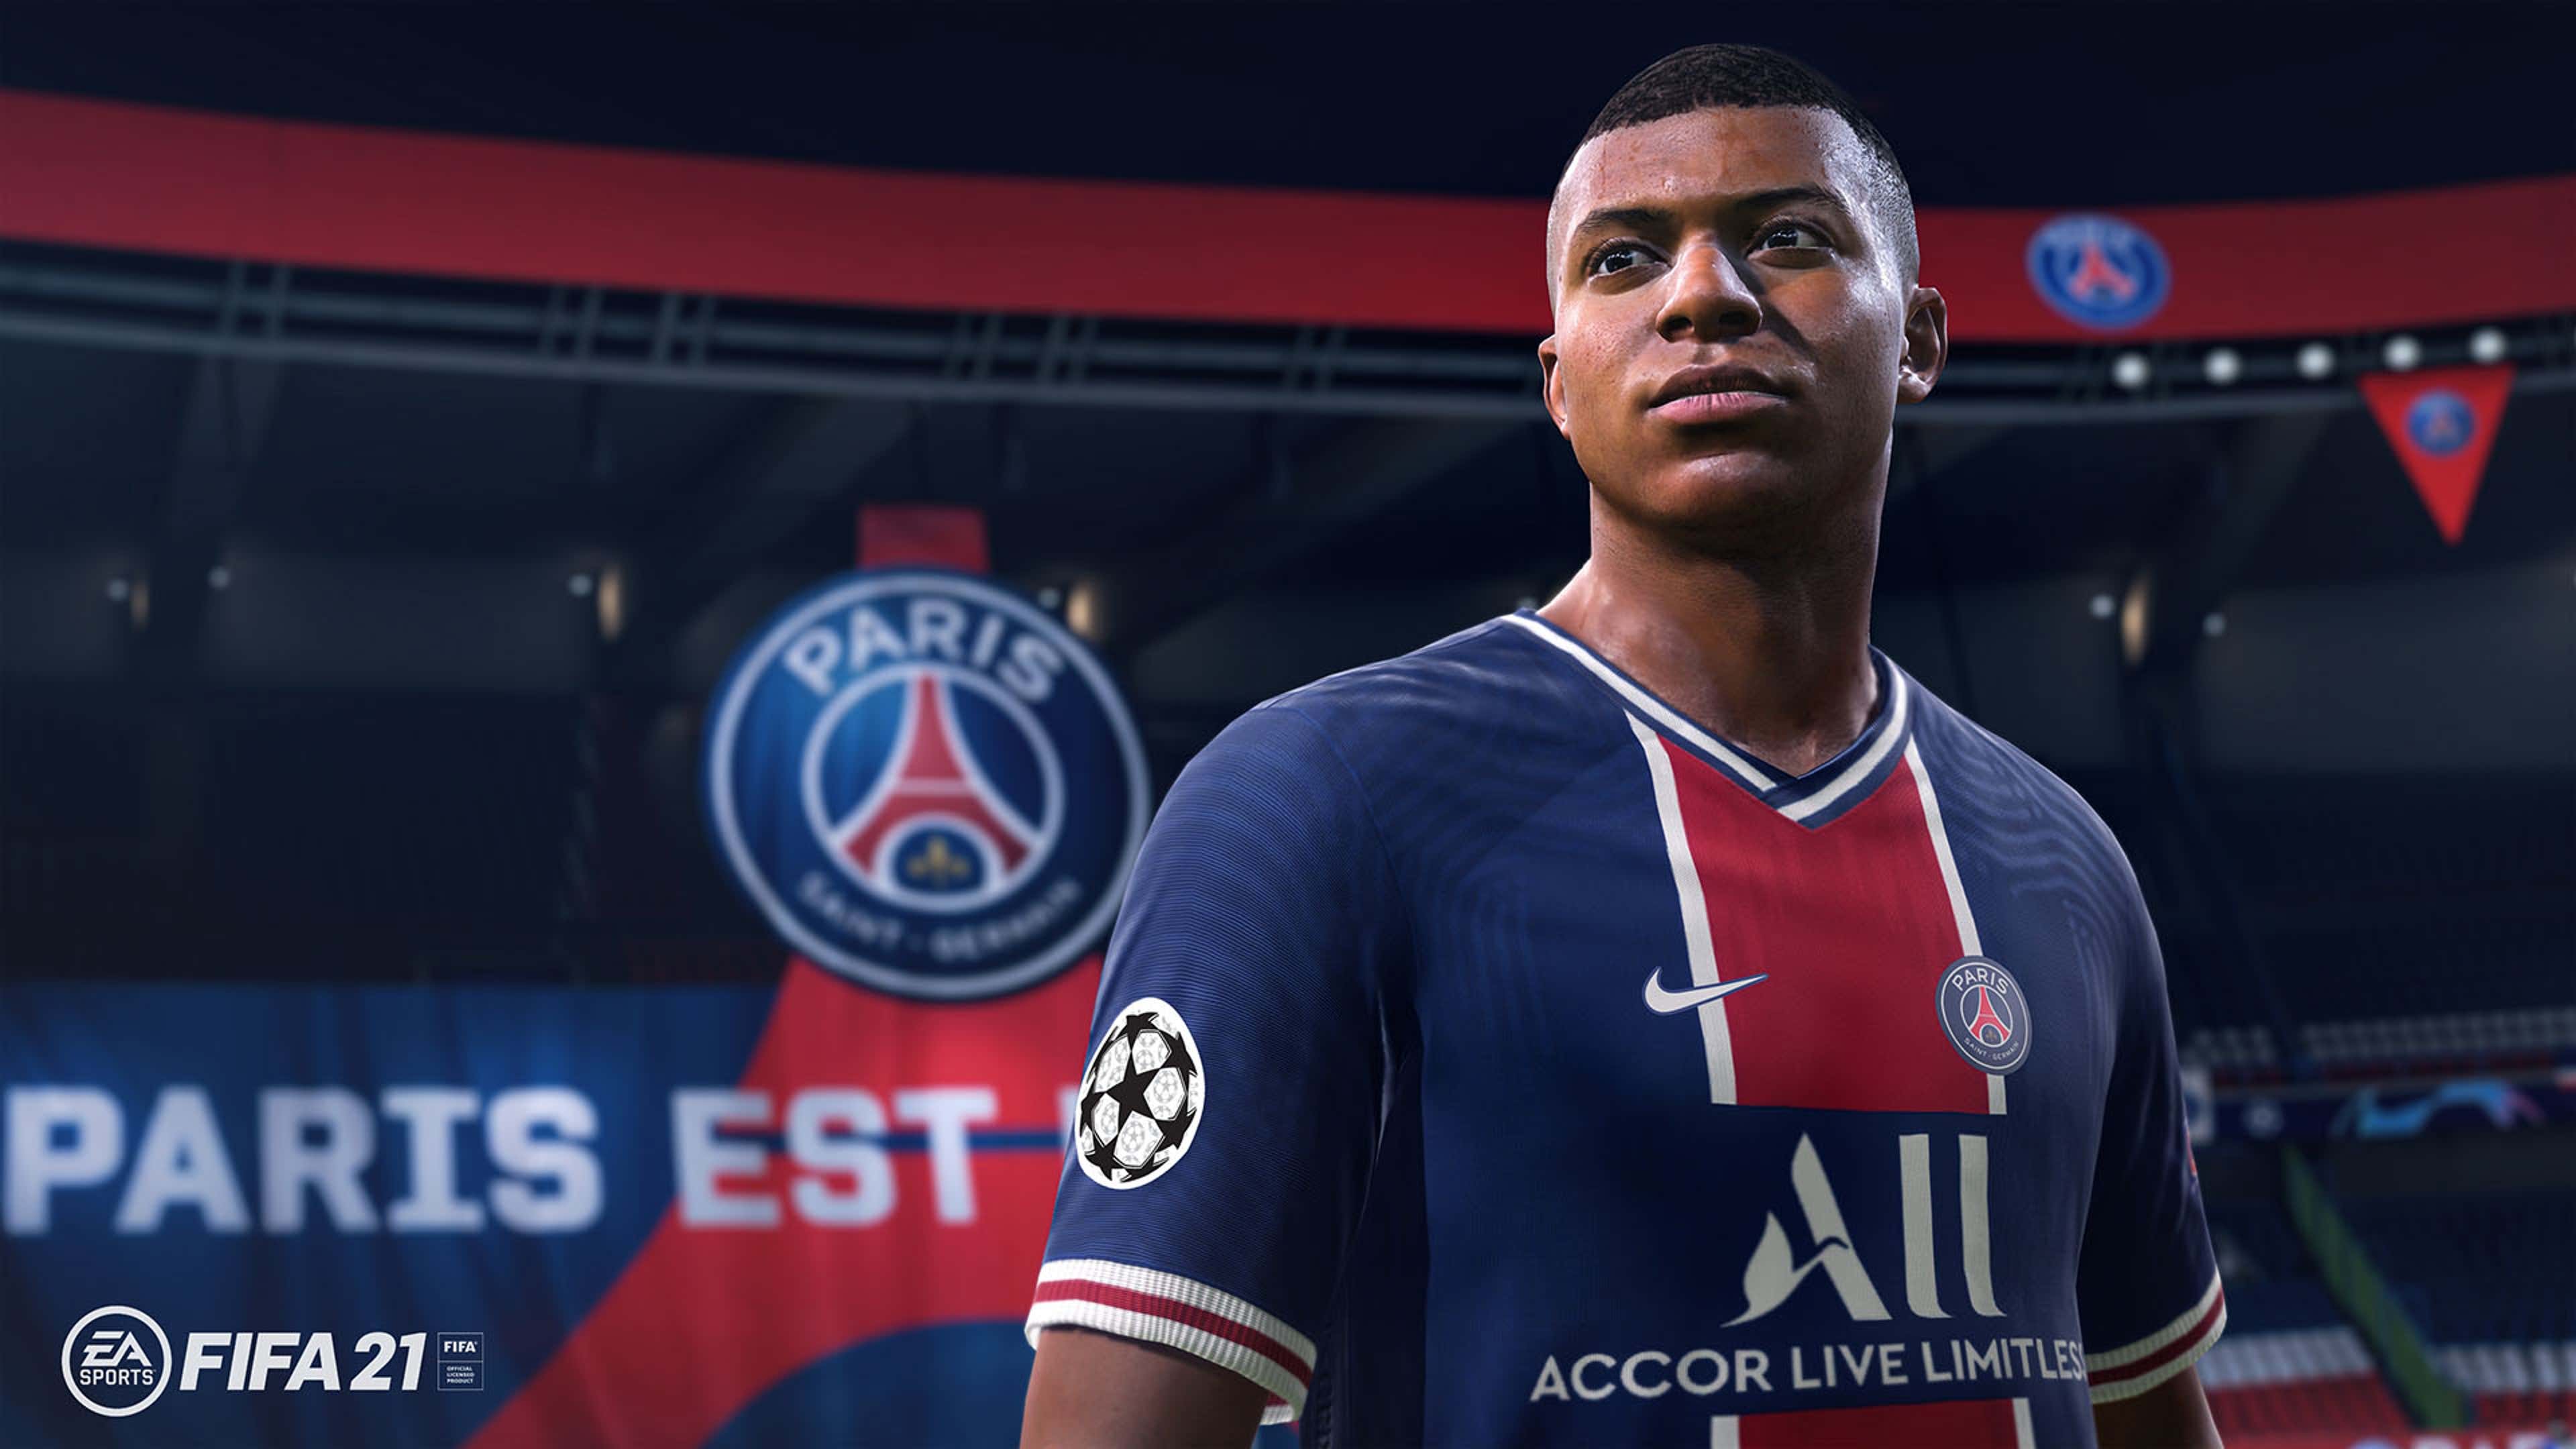 Here's everything you need to know about 'FIFA 21' and its brand new  features - Entertainment